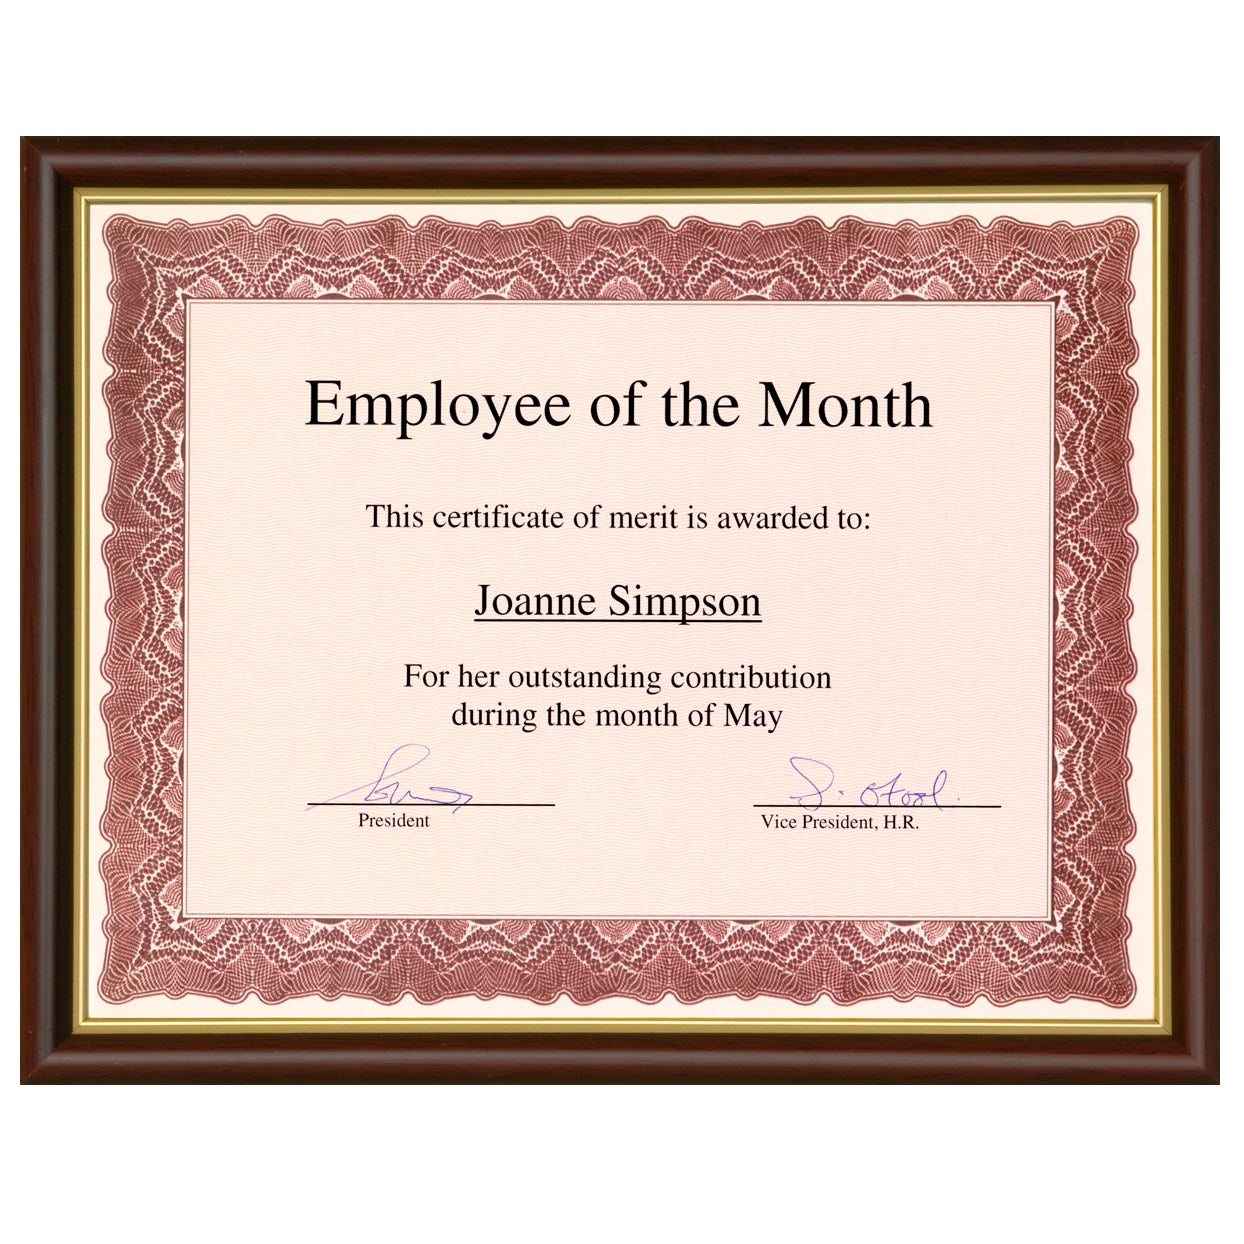 St. James® Awards & Certificate Frame/Diploma Frame/Document Frame, 12 x 9½" (31 x 24cm), Tuscan Cherry with Gold Trim